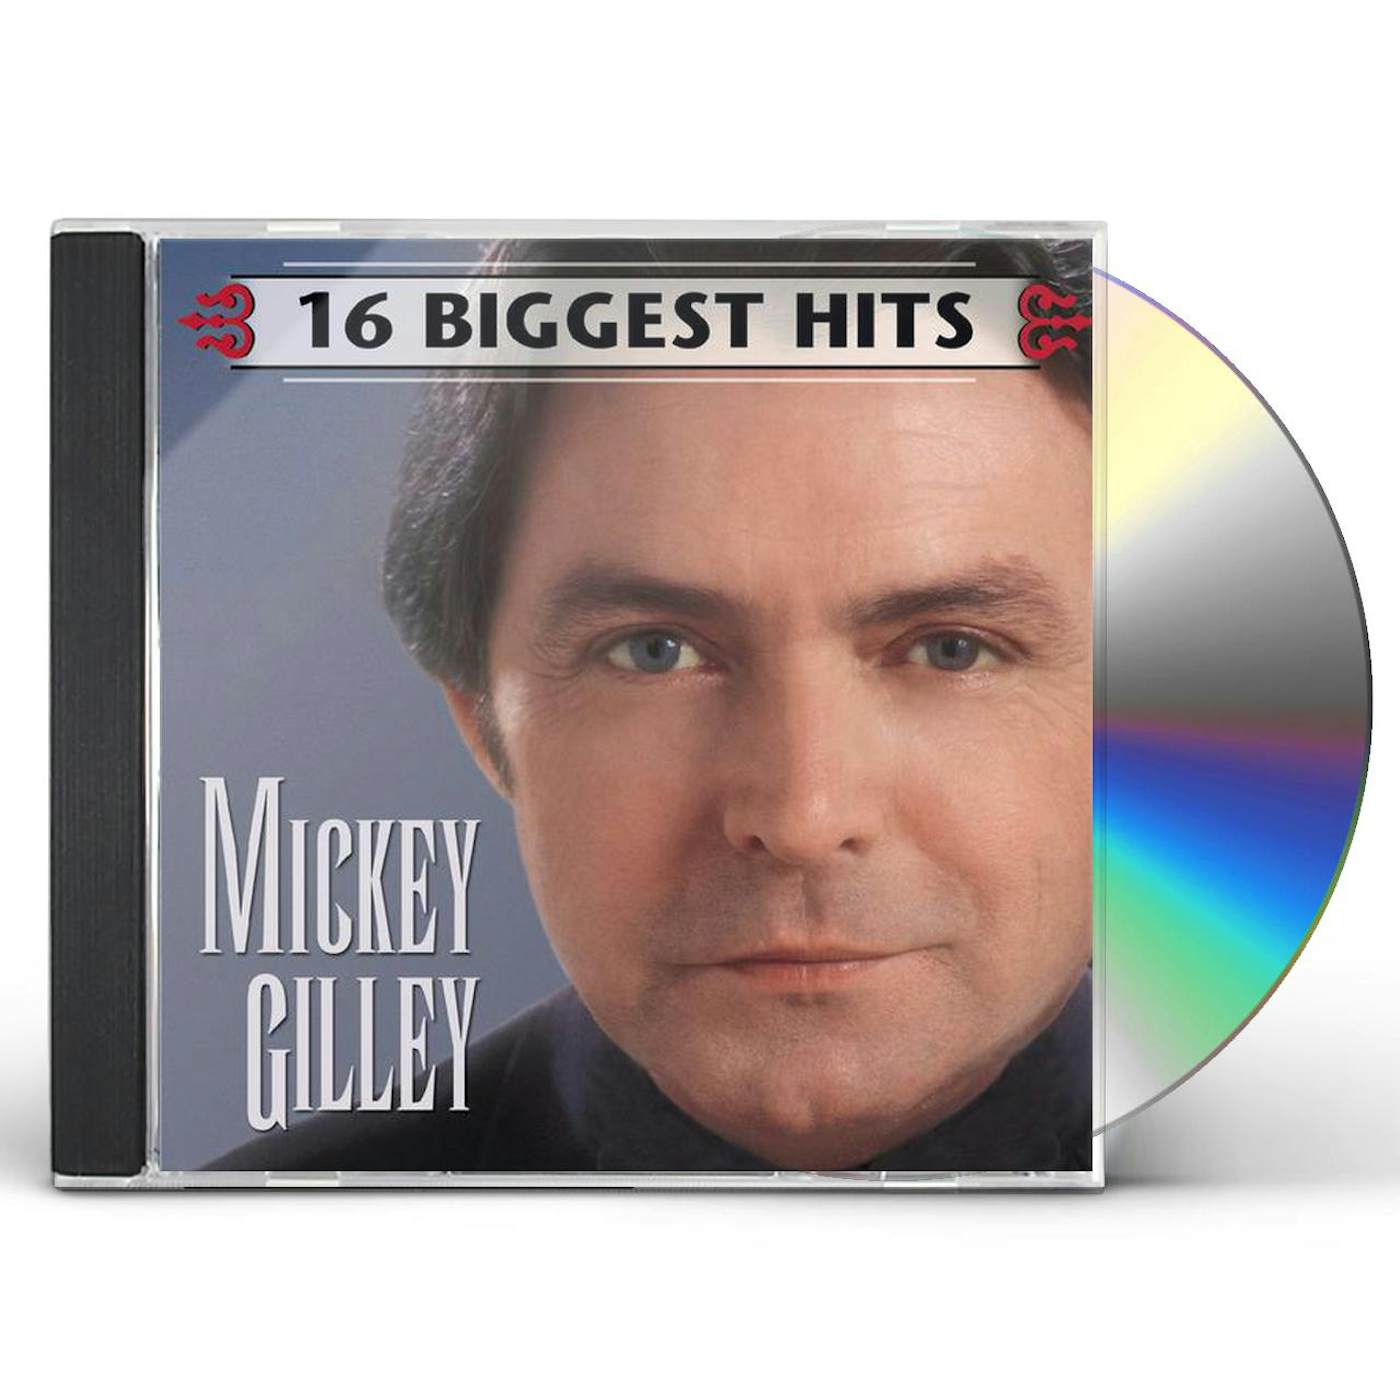 Gilley Mickey 16 Biggest Hits